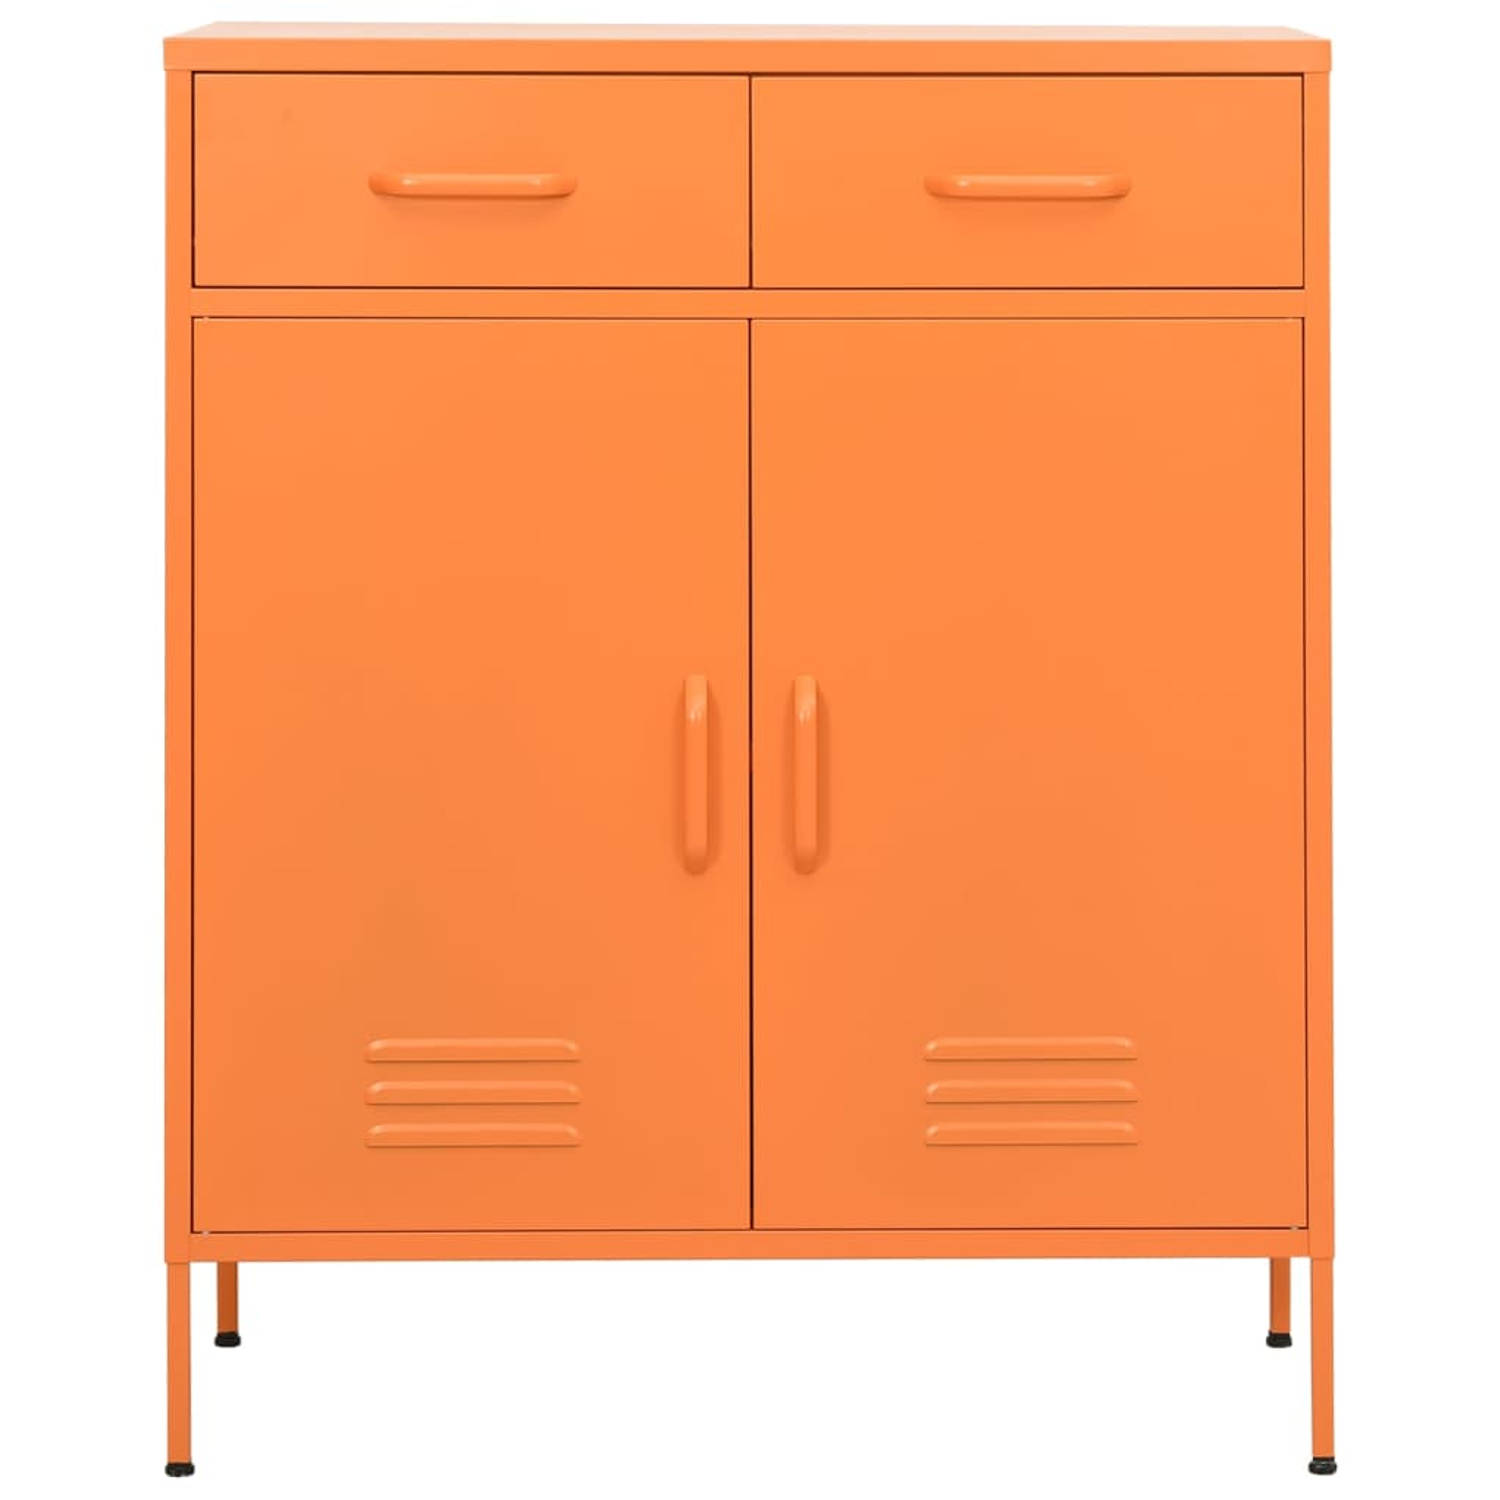 The Living Store Opbergkast Staal - 80 x 35 x 101.5 cm - Oranje